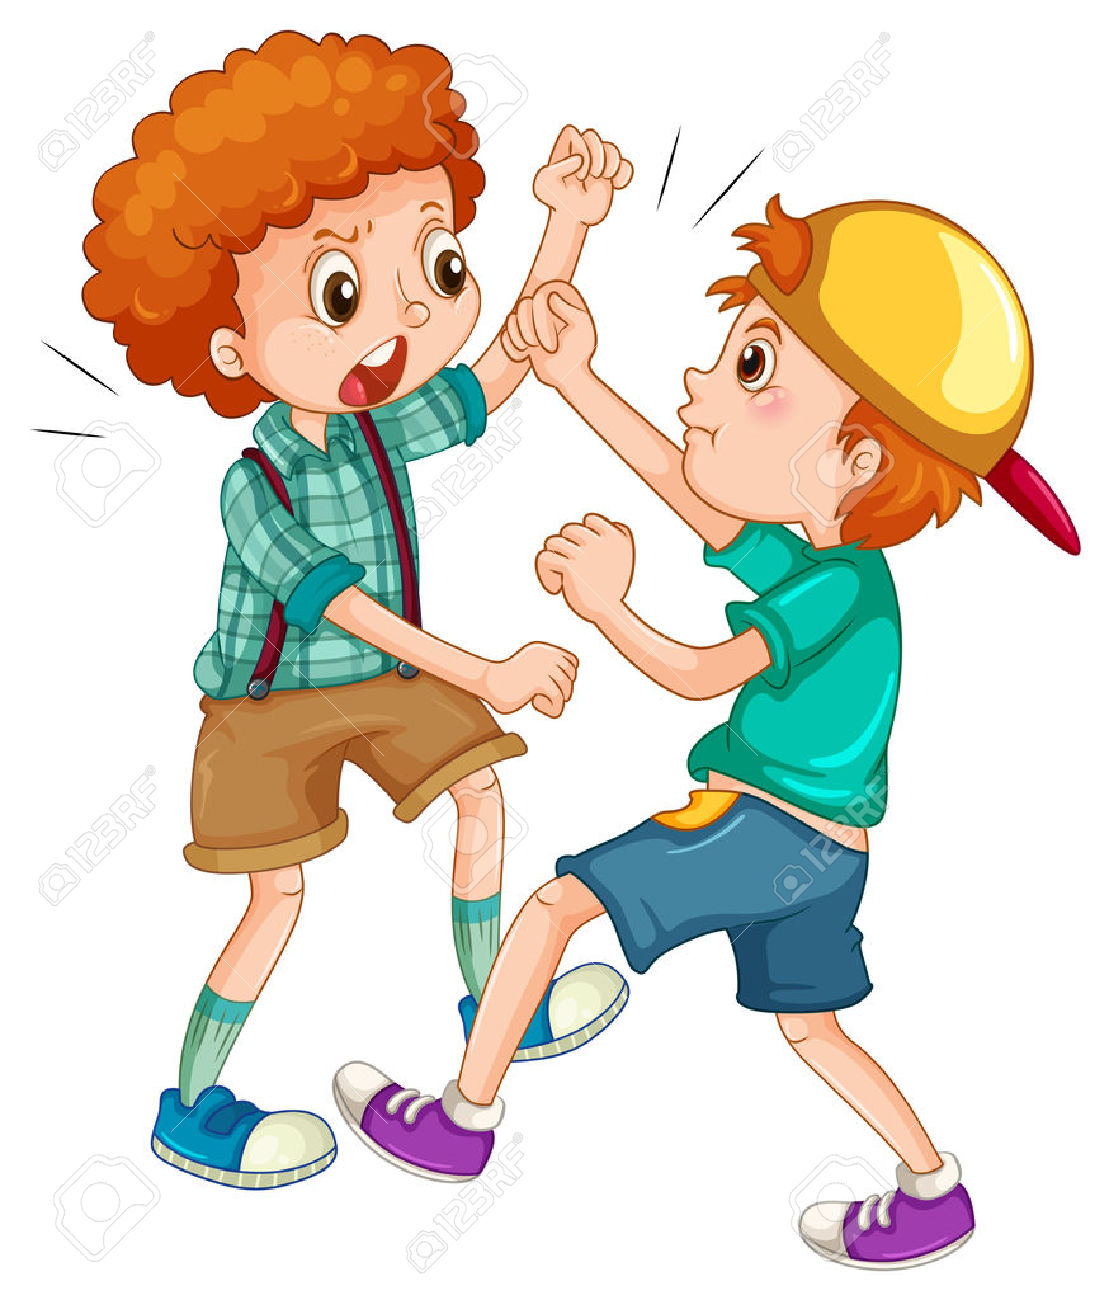 people fighting: Two boys fighting each other illustration